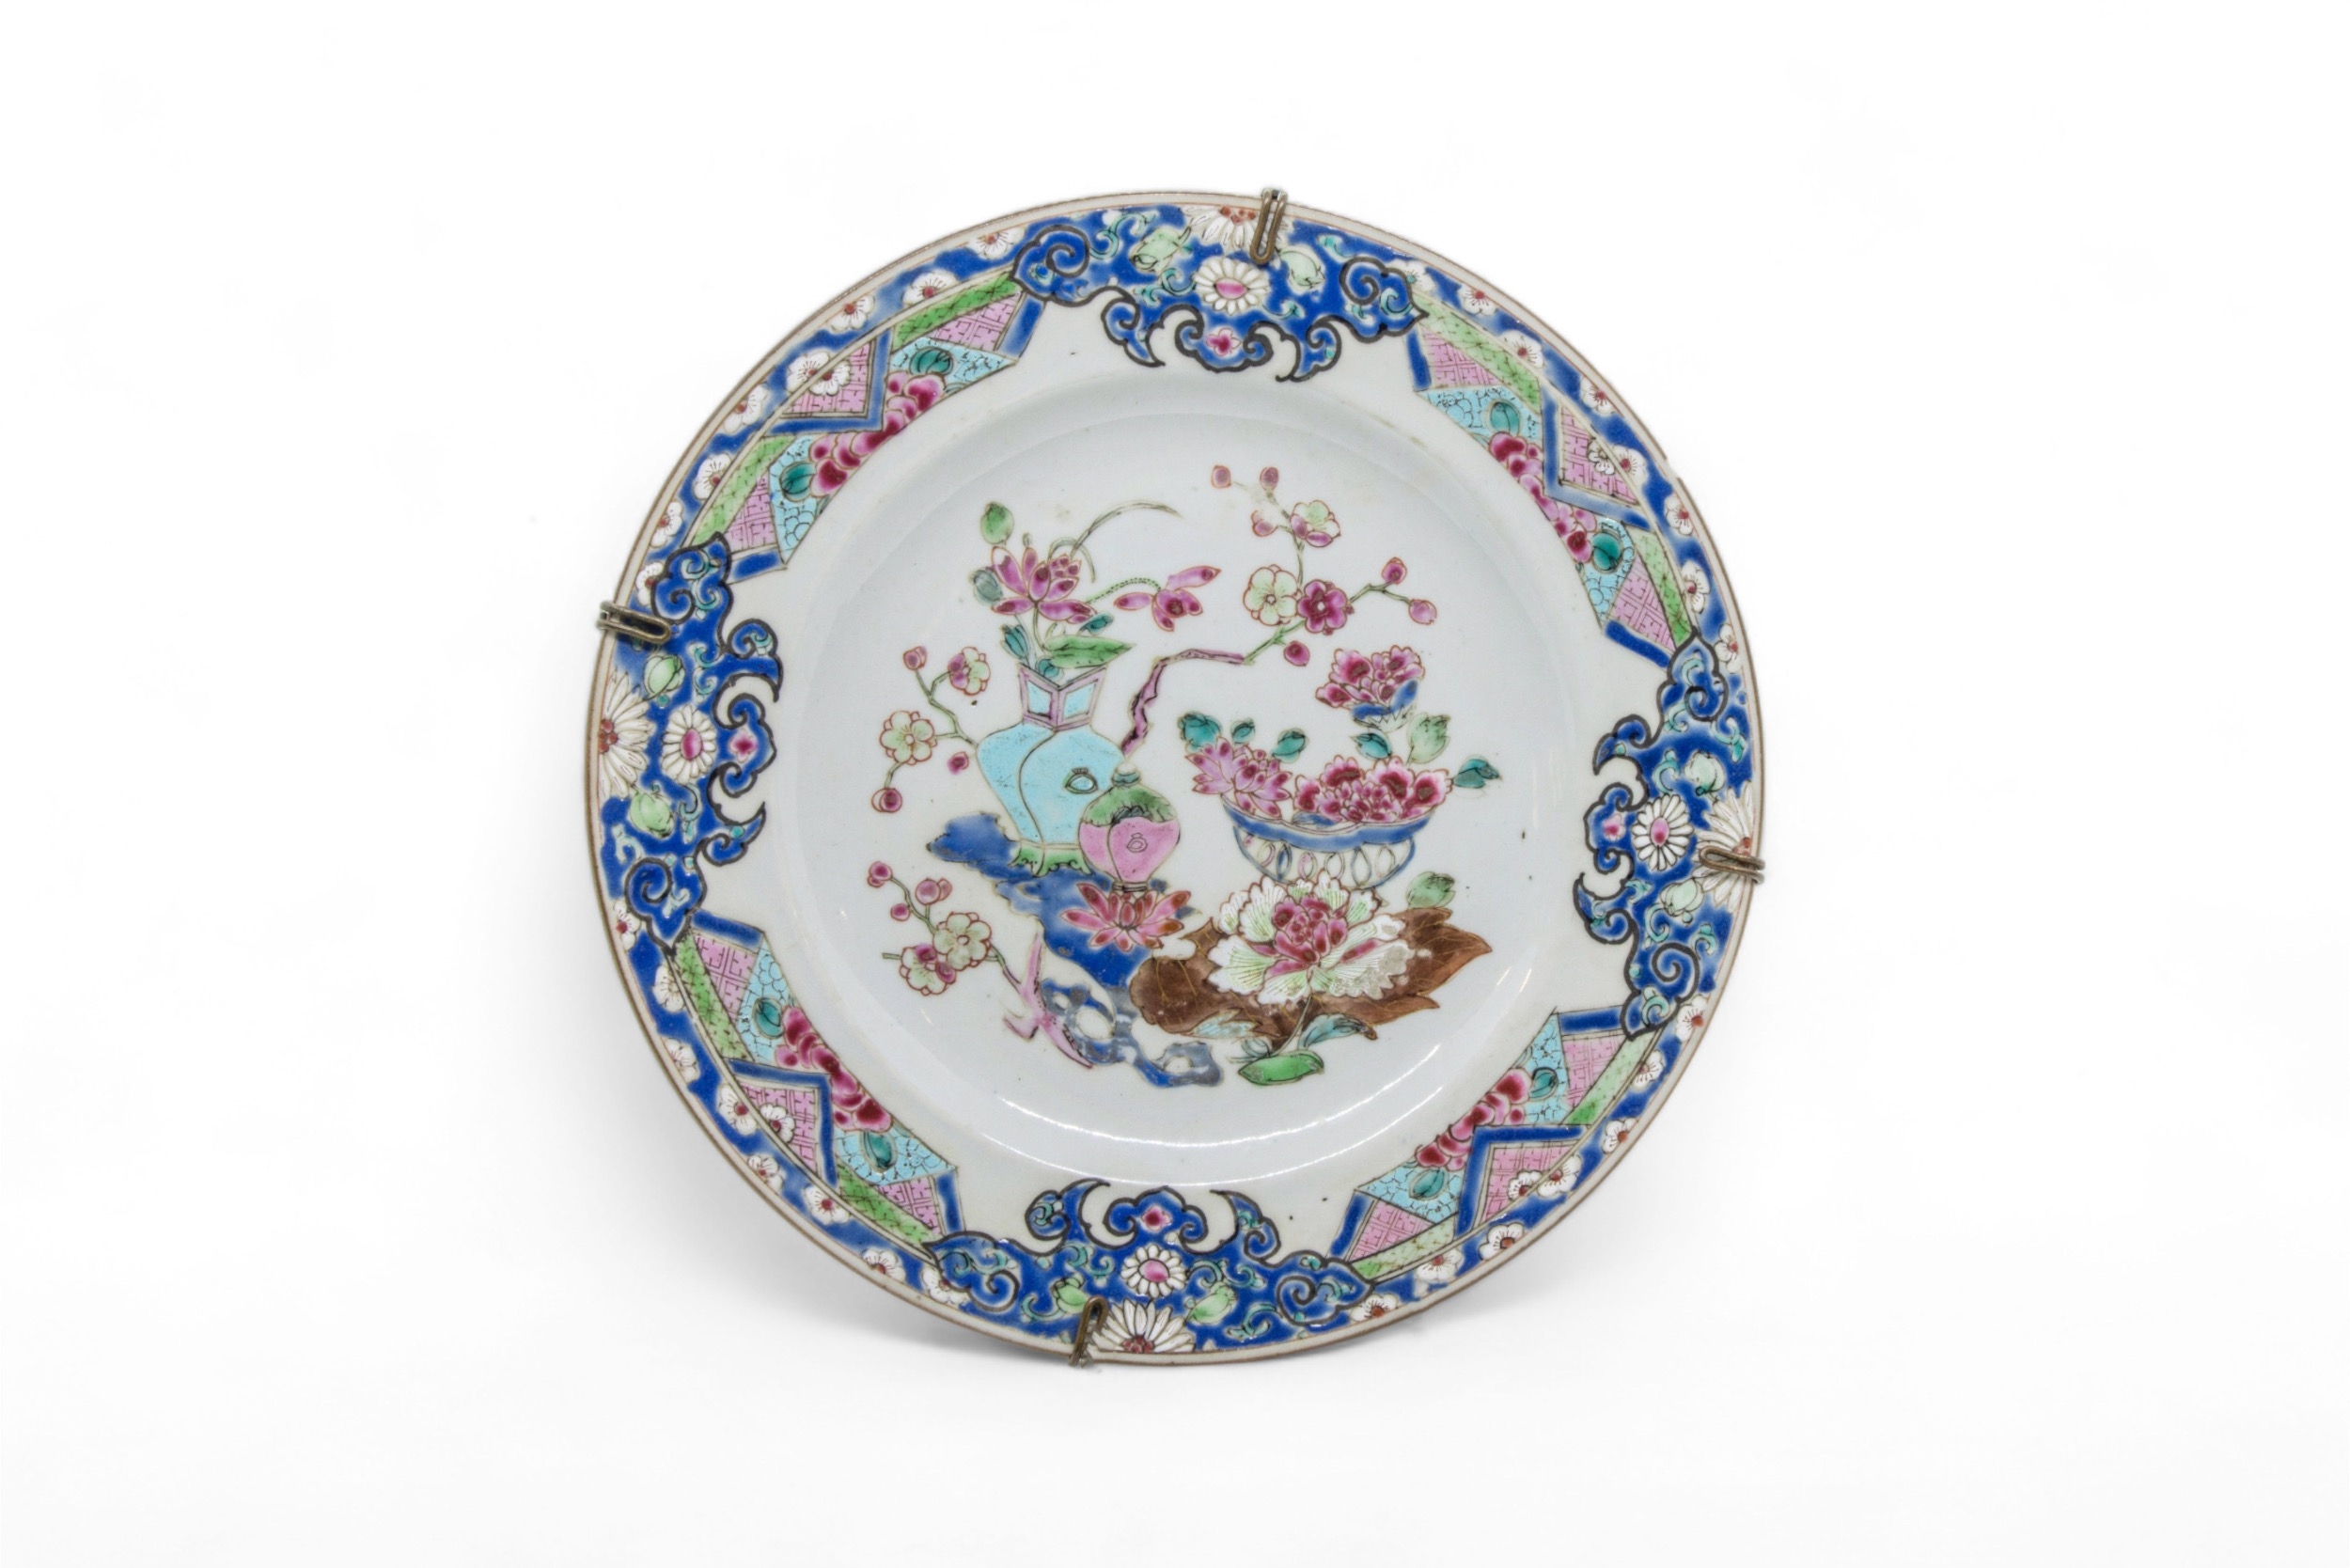 A GROUP OF TEN CHINESE EXPORT DISHES QING DYNASTY, 18TH CENTURY 23cm diam approx. - Image 6 of 11